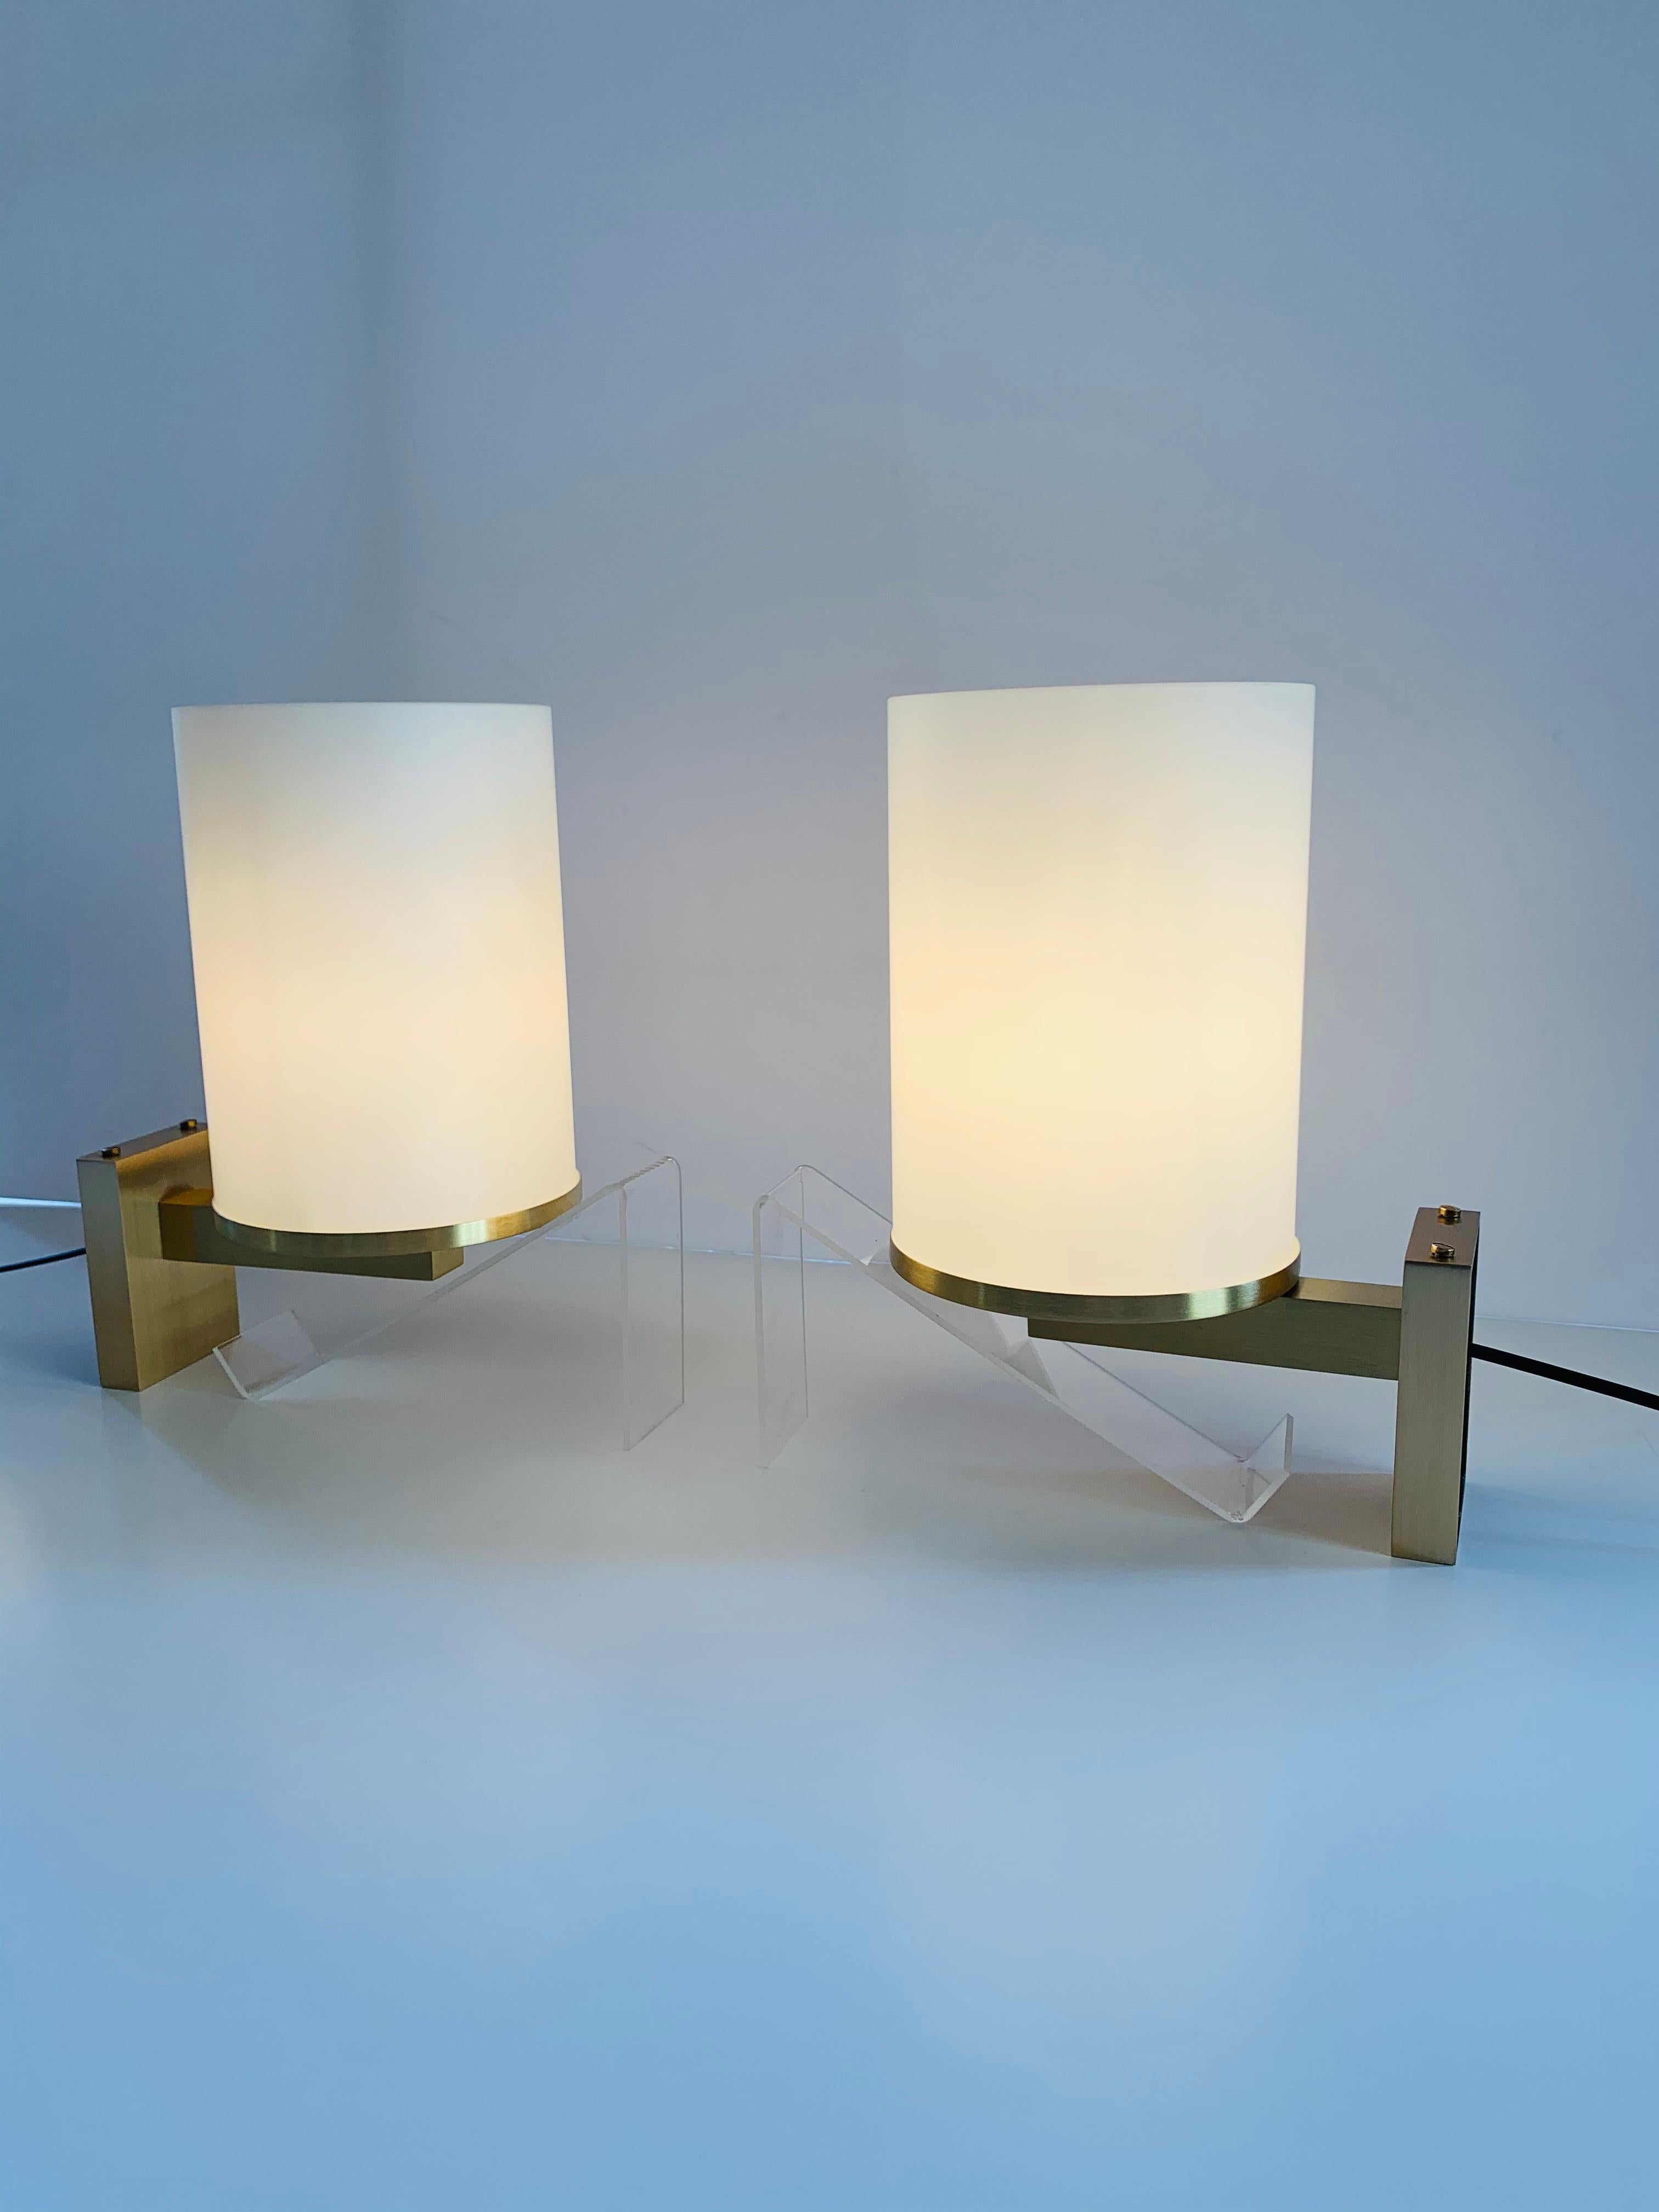 French Pair of Art Deco Sconces Signed Perzel 'Art Deco Wall Lights : Rare' For Sale